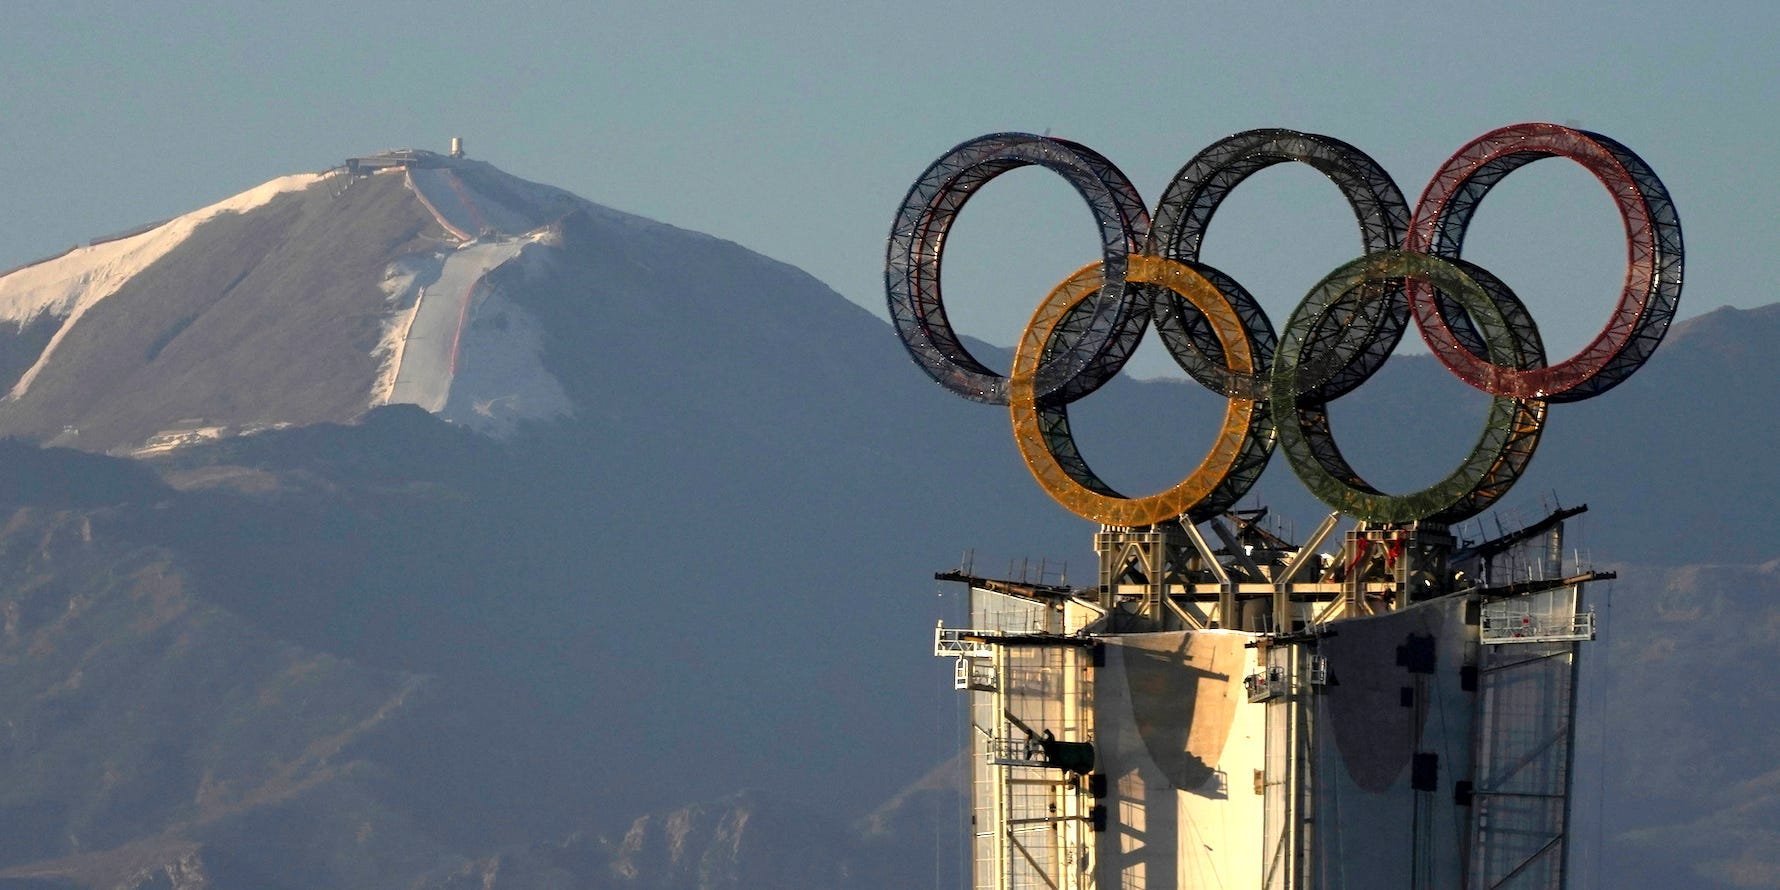 The Olympic rings sit atop a tower with mountains in the background near Beijing.